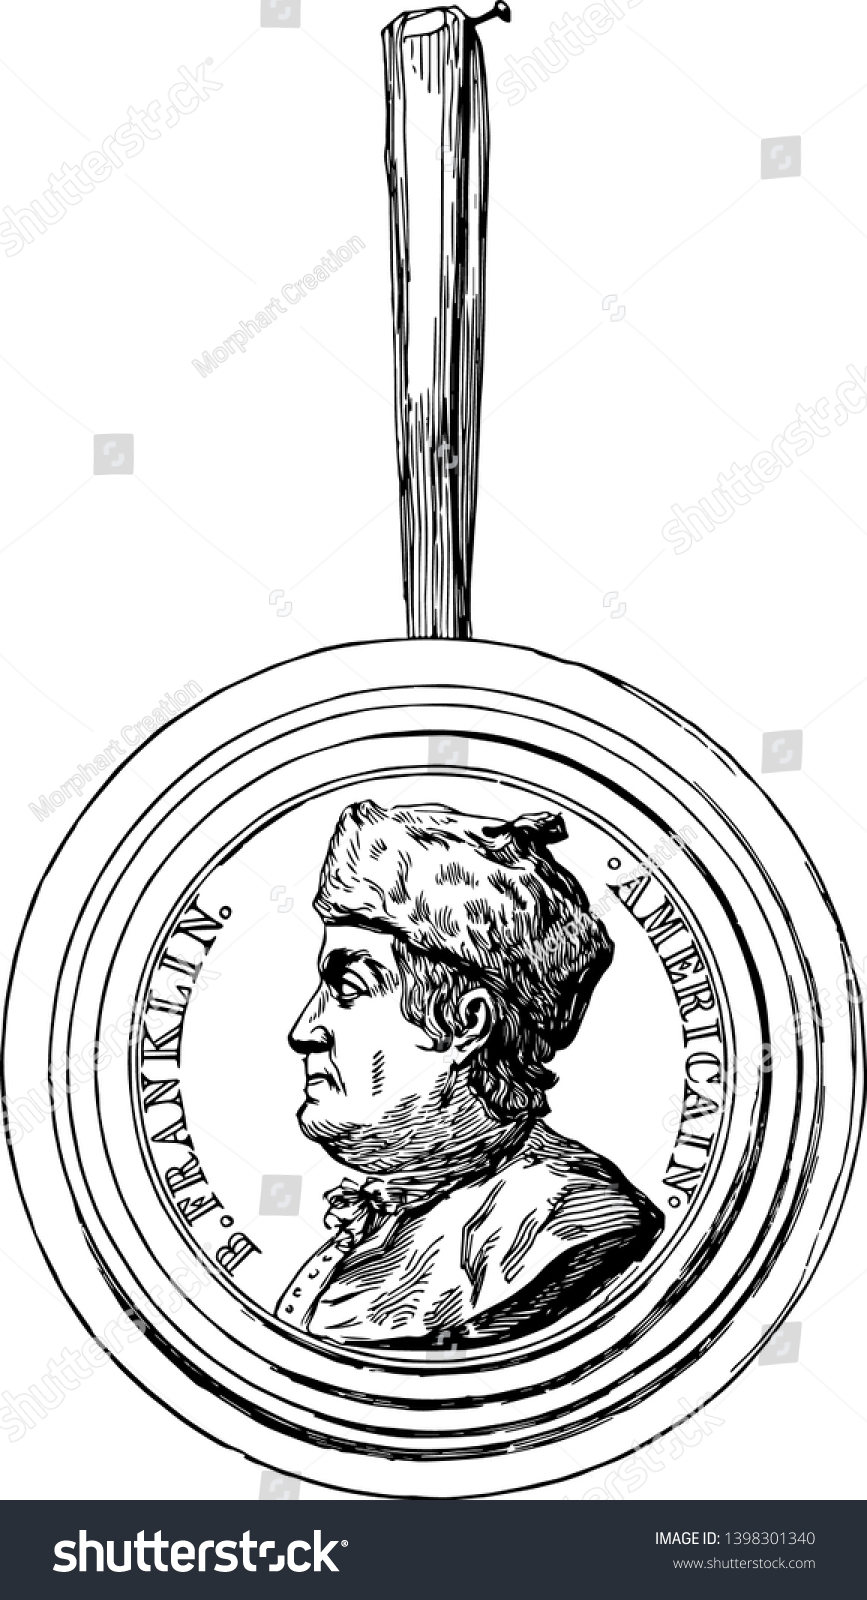 SVG of The Franklin Medallion Franklin was a celebrity in Paris even before his arrival in 1777 and medallions from the faience pottery at Chaumont vintage line drawing or engraving illustration svg